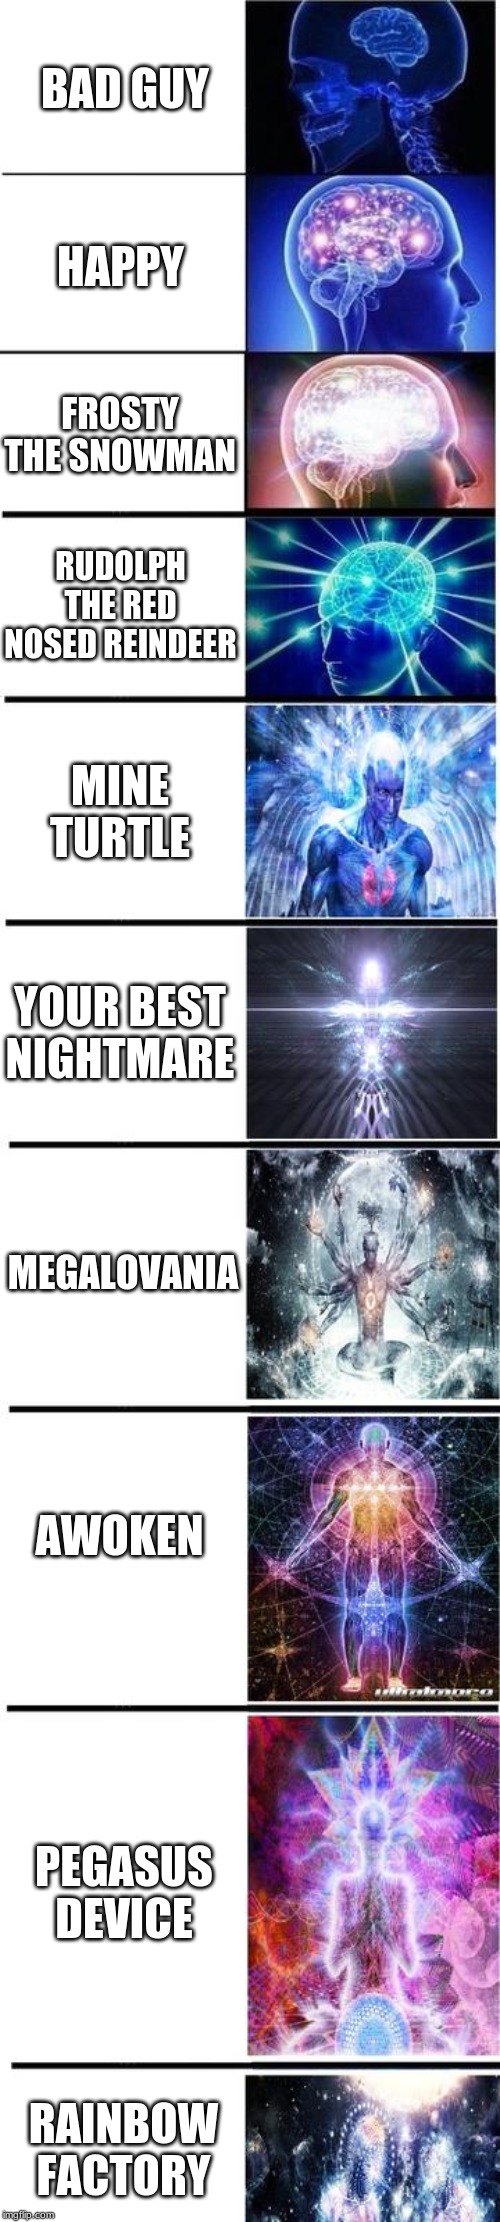 expanding brain | BAD GUY; HAPPY; FROSTY THE SNOWMAN; RUDOLPH THE RED NOSED REINDEER; MINE TURTLE; YOUR BEST NIGHTMARE; MEGALOVANIA; AWOKEN; PEGASUS DEVICE; RAINBOW FACTORY | image tagged in expanding brain | made w/ Imgflip meme maker